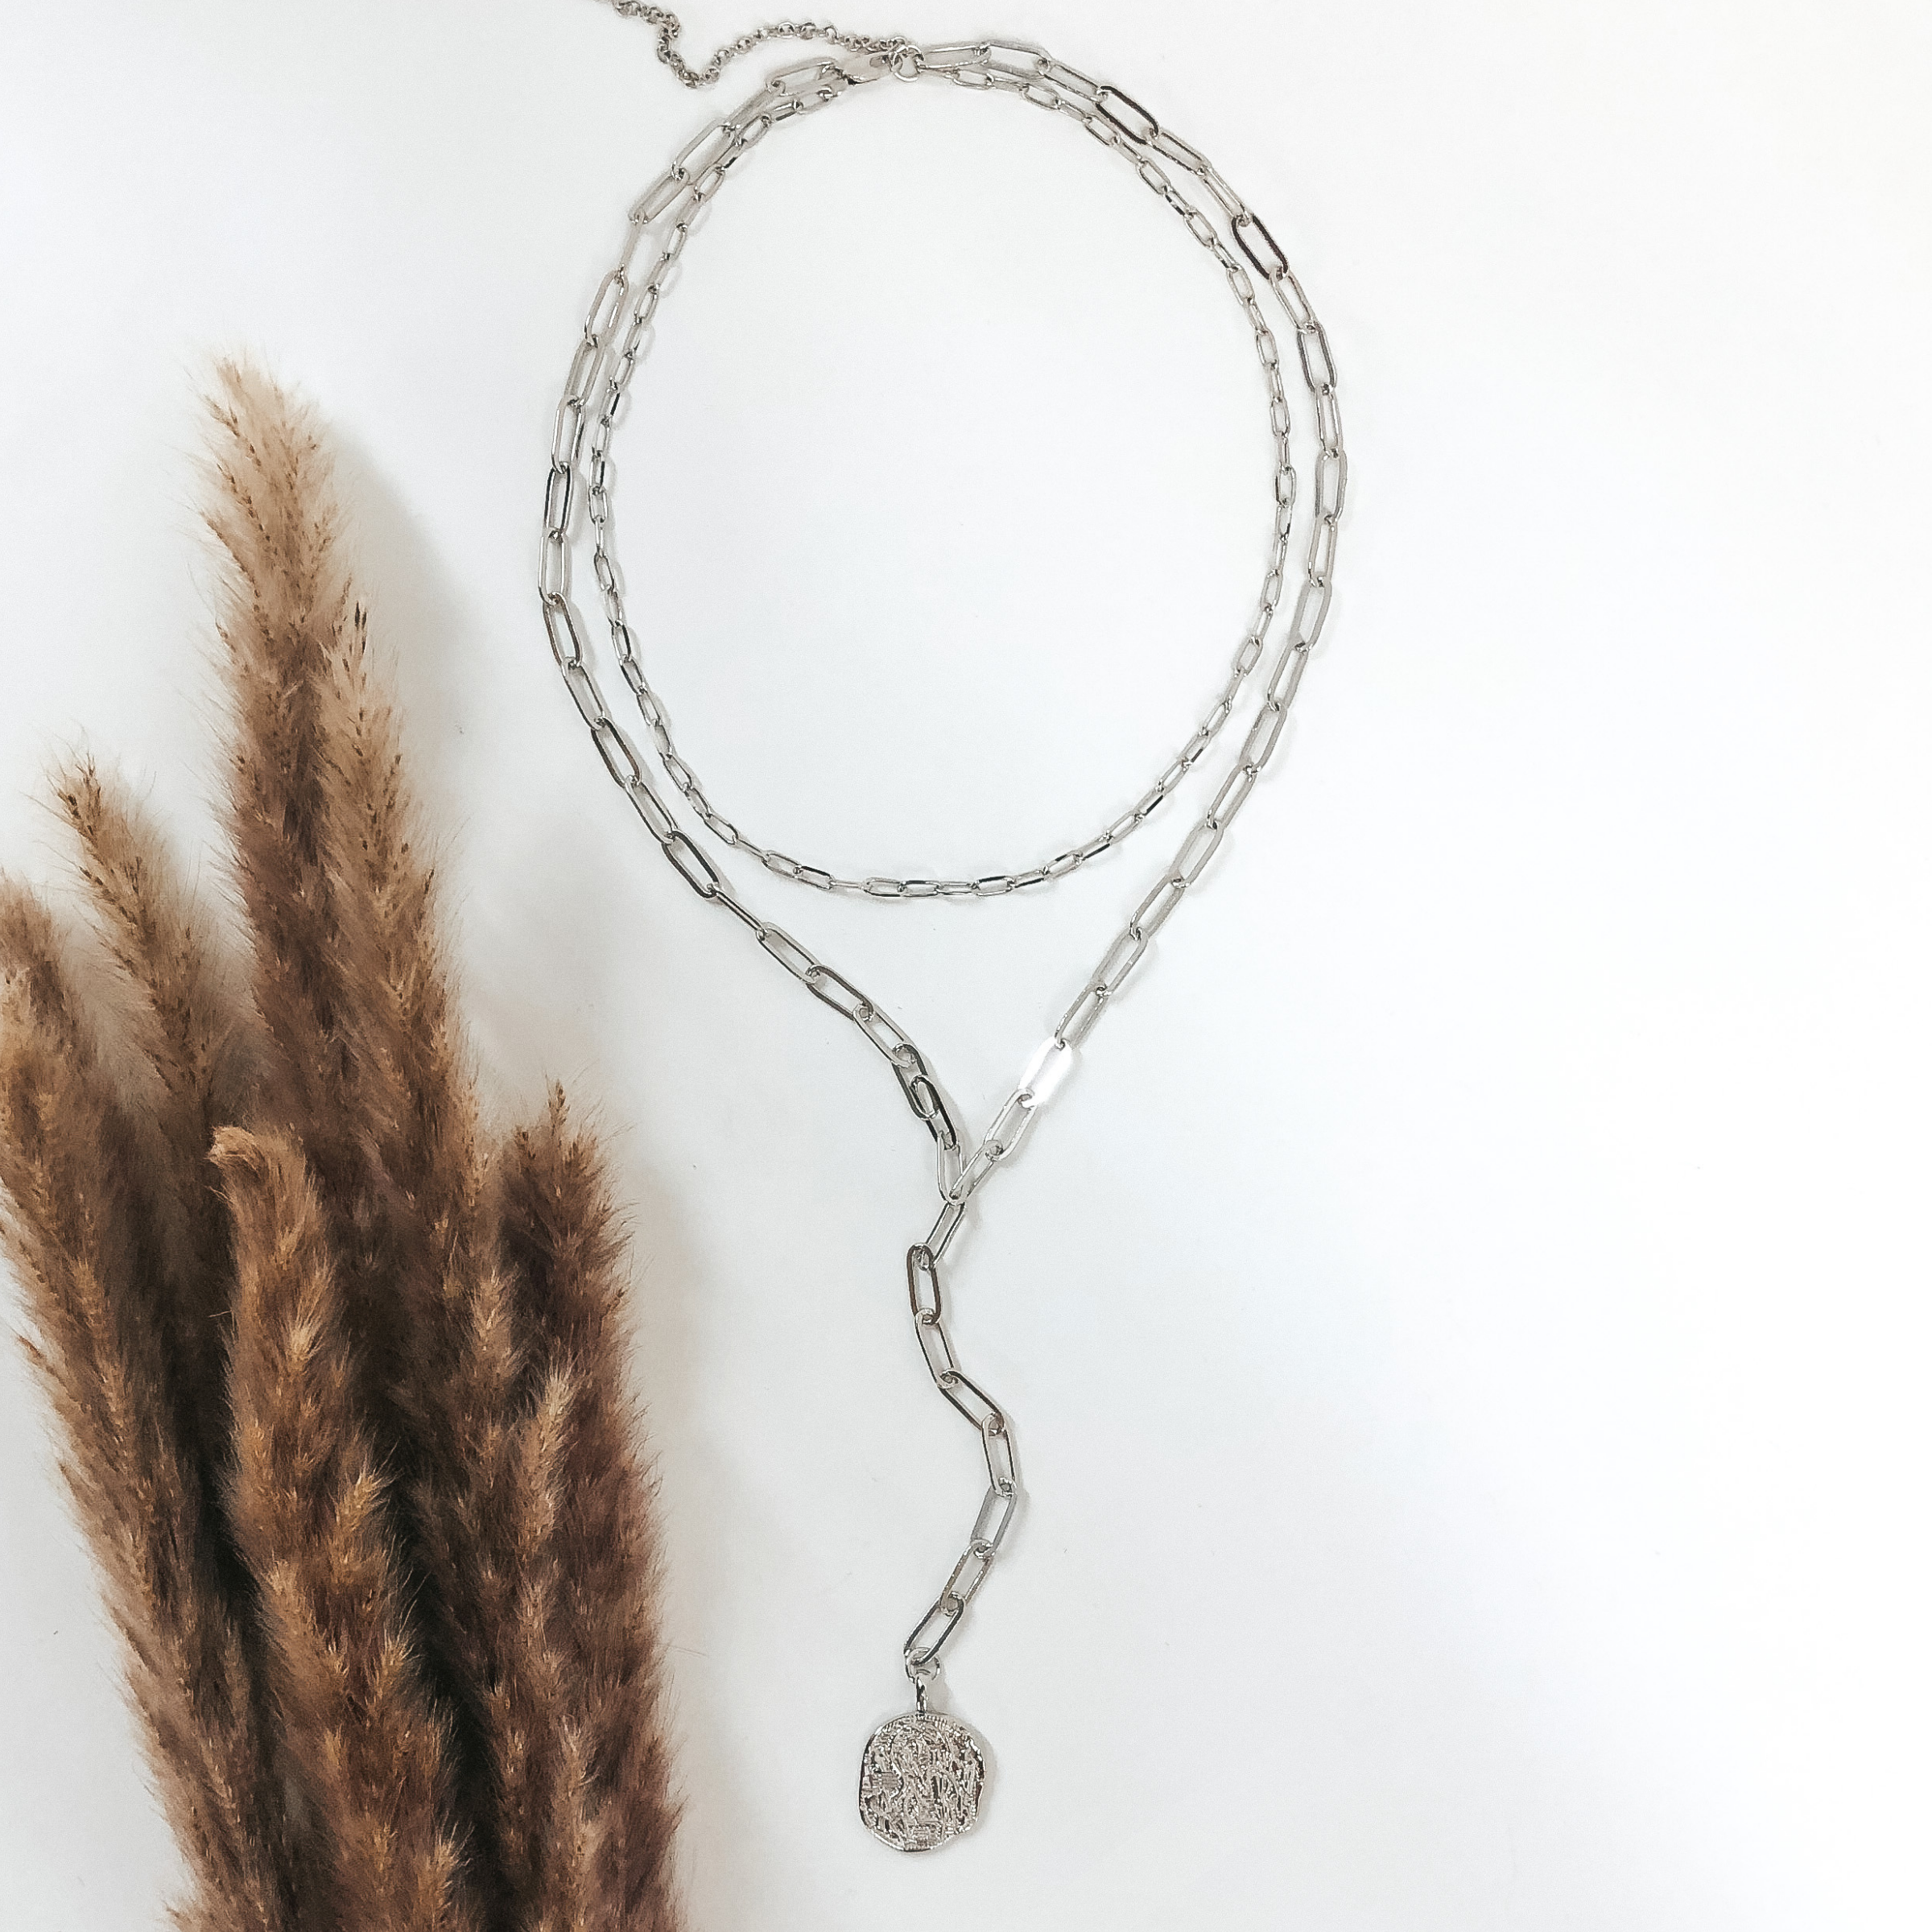 Two Strand Multi Chain Lariat Style Necklace with Coin in Silver - Giddy Up Glamour Boutique